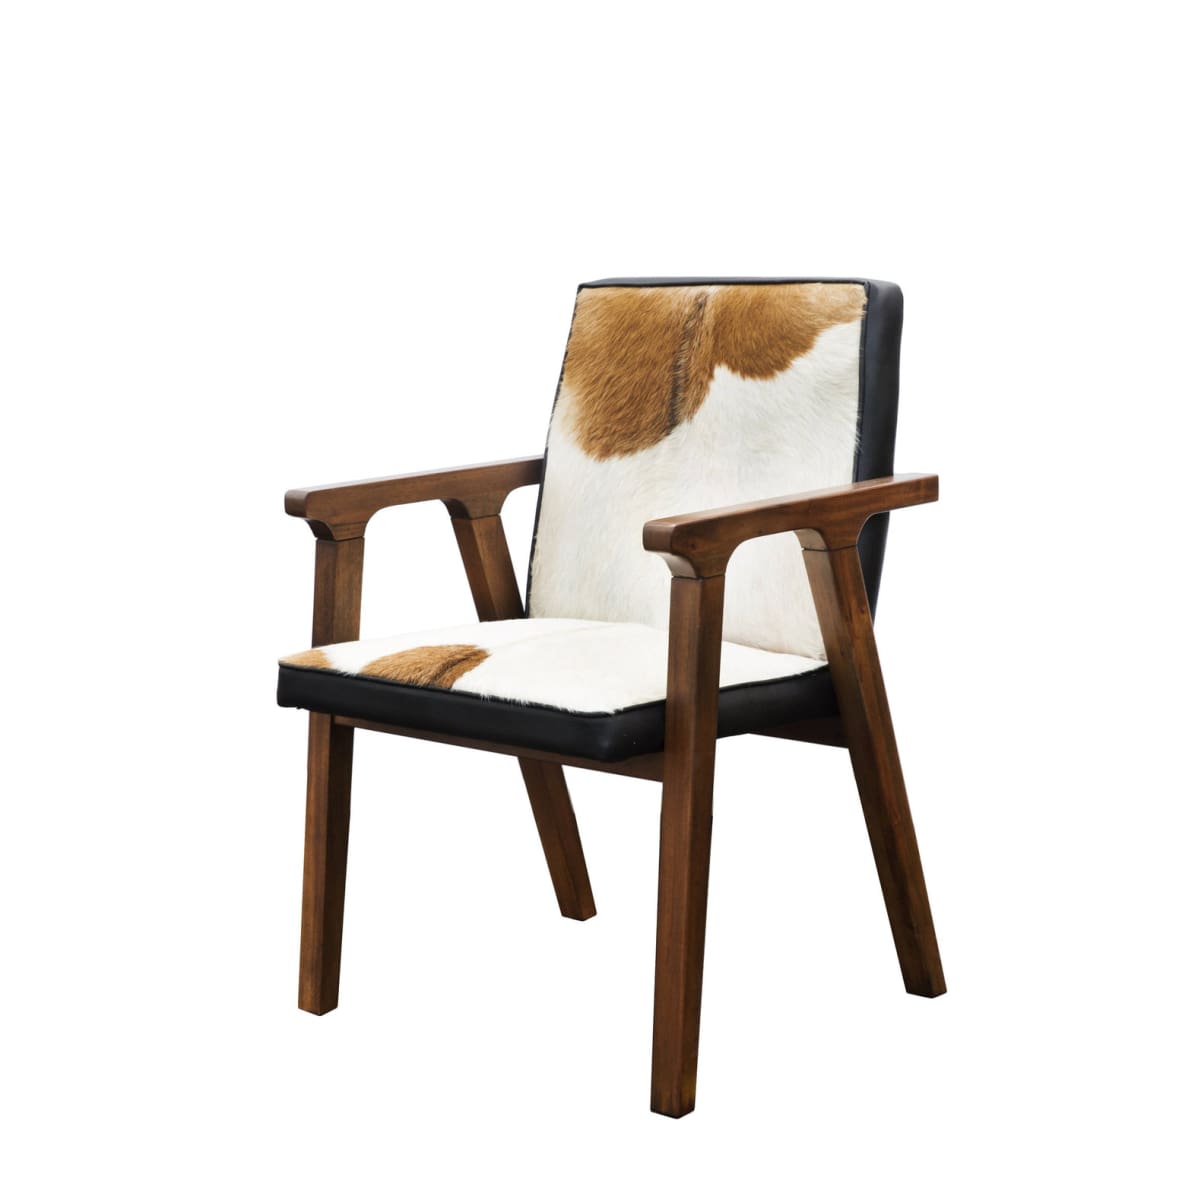 Rio Cool Armchair - Cool Brown Leather/Goat Hair - lh-import-accent-club-chairs